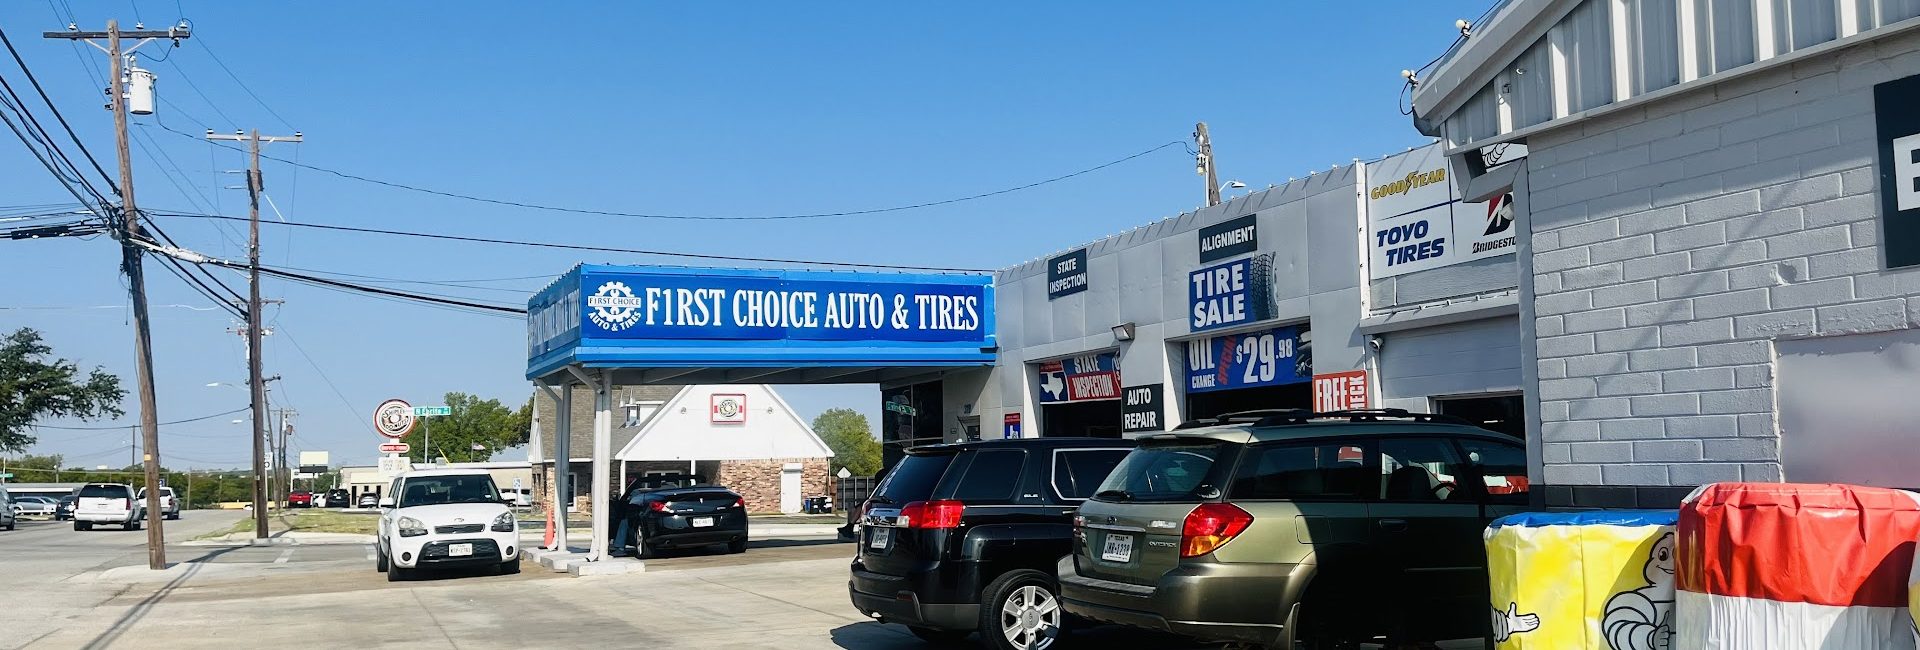 FIRST CHOICE AUTO & TIRES 2